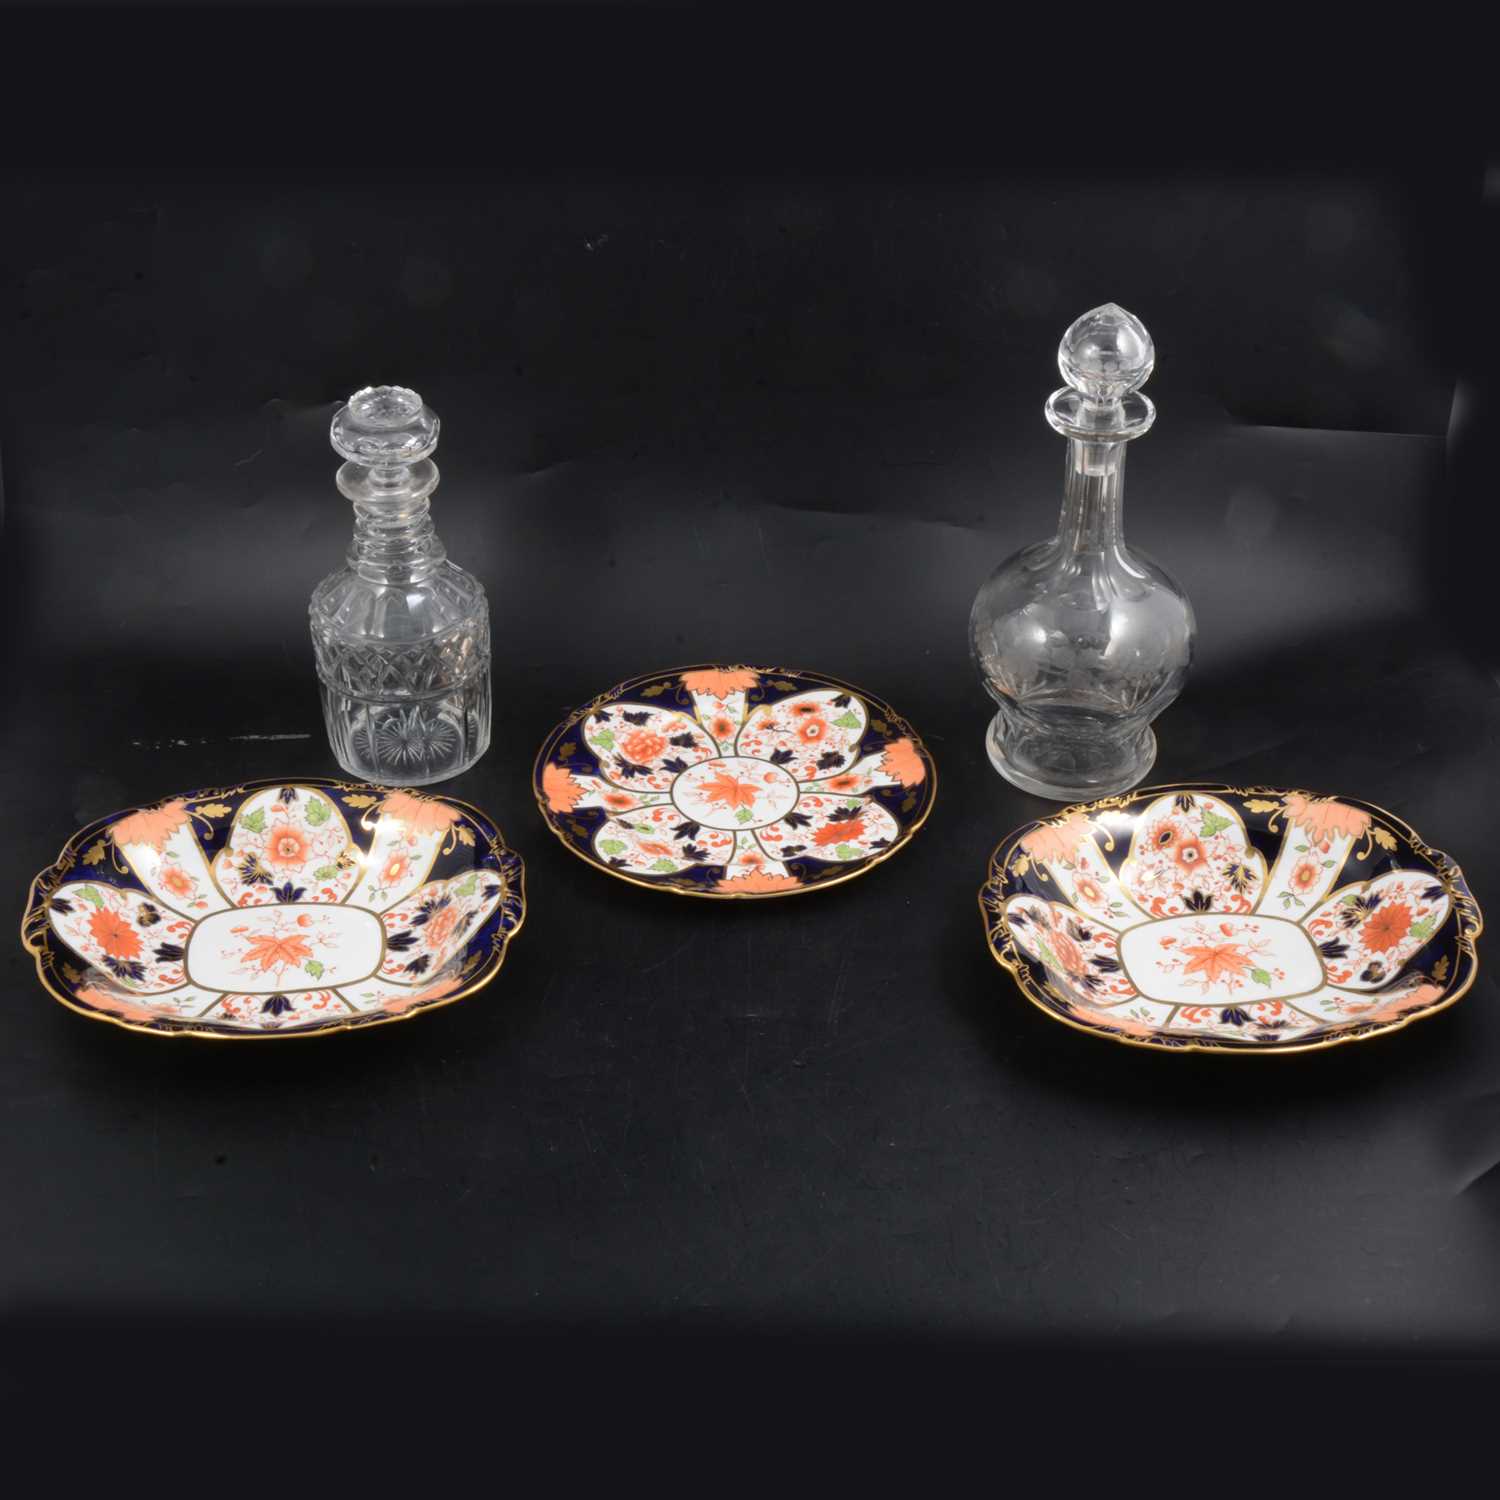 Lot 66 - Royal Crown Derby Imari pattern dishes, plus cut glass decanters.